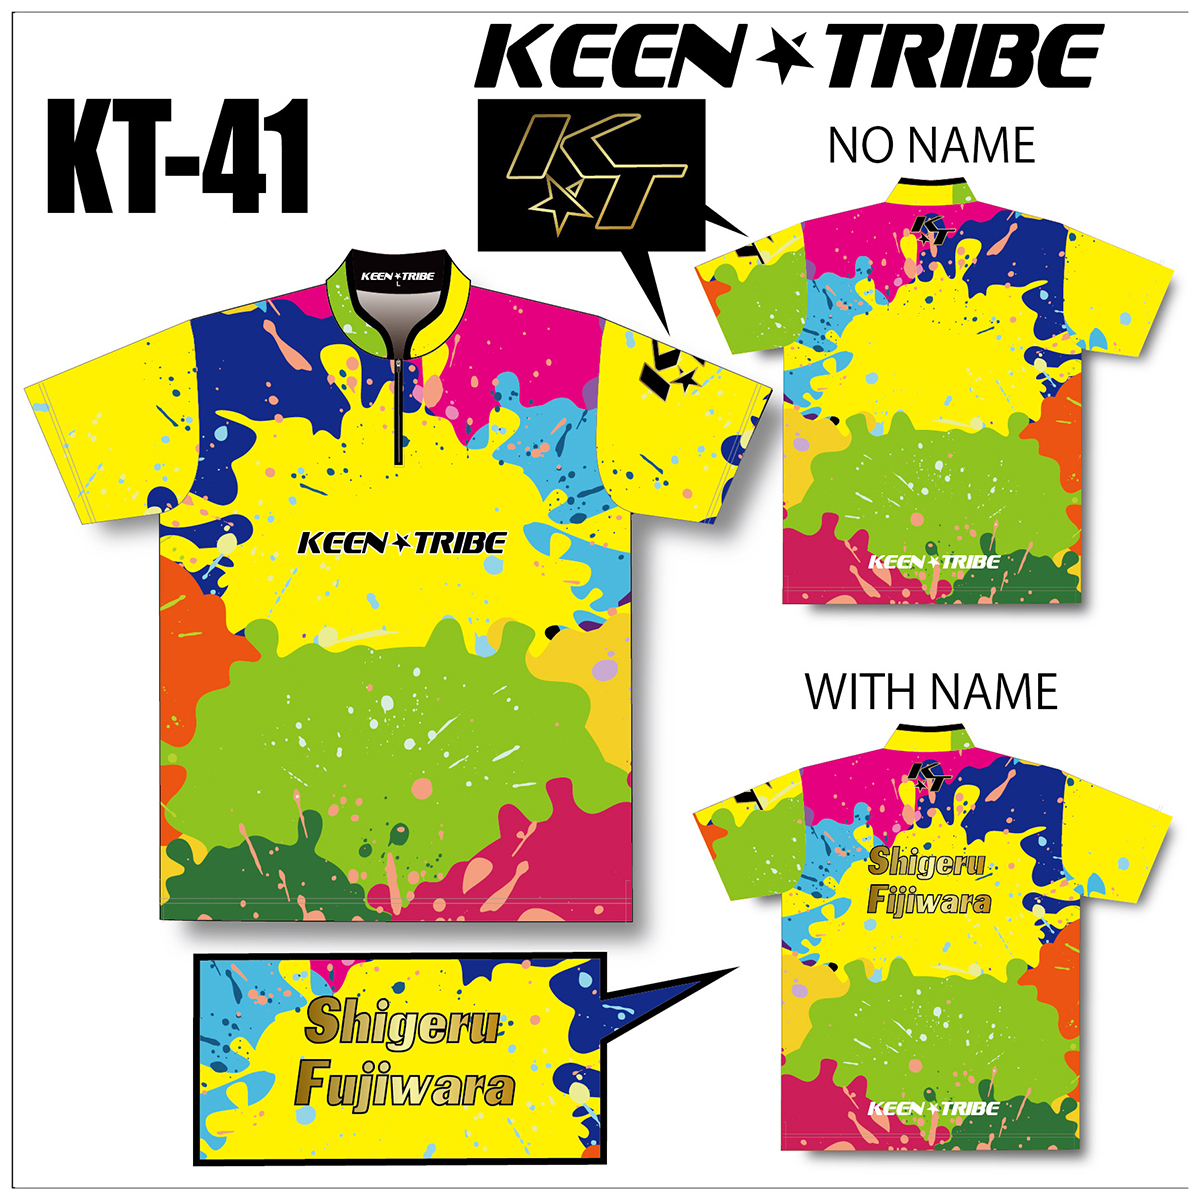 KEEN ★ TRIBE　KT-41(受注生産)